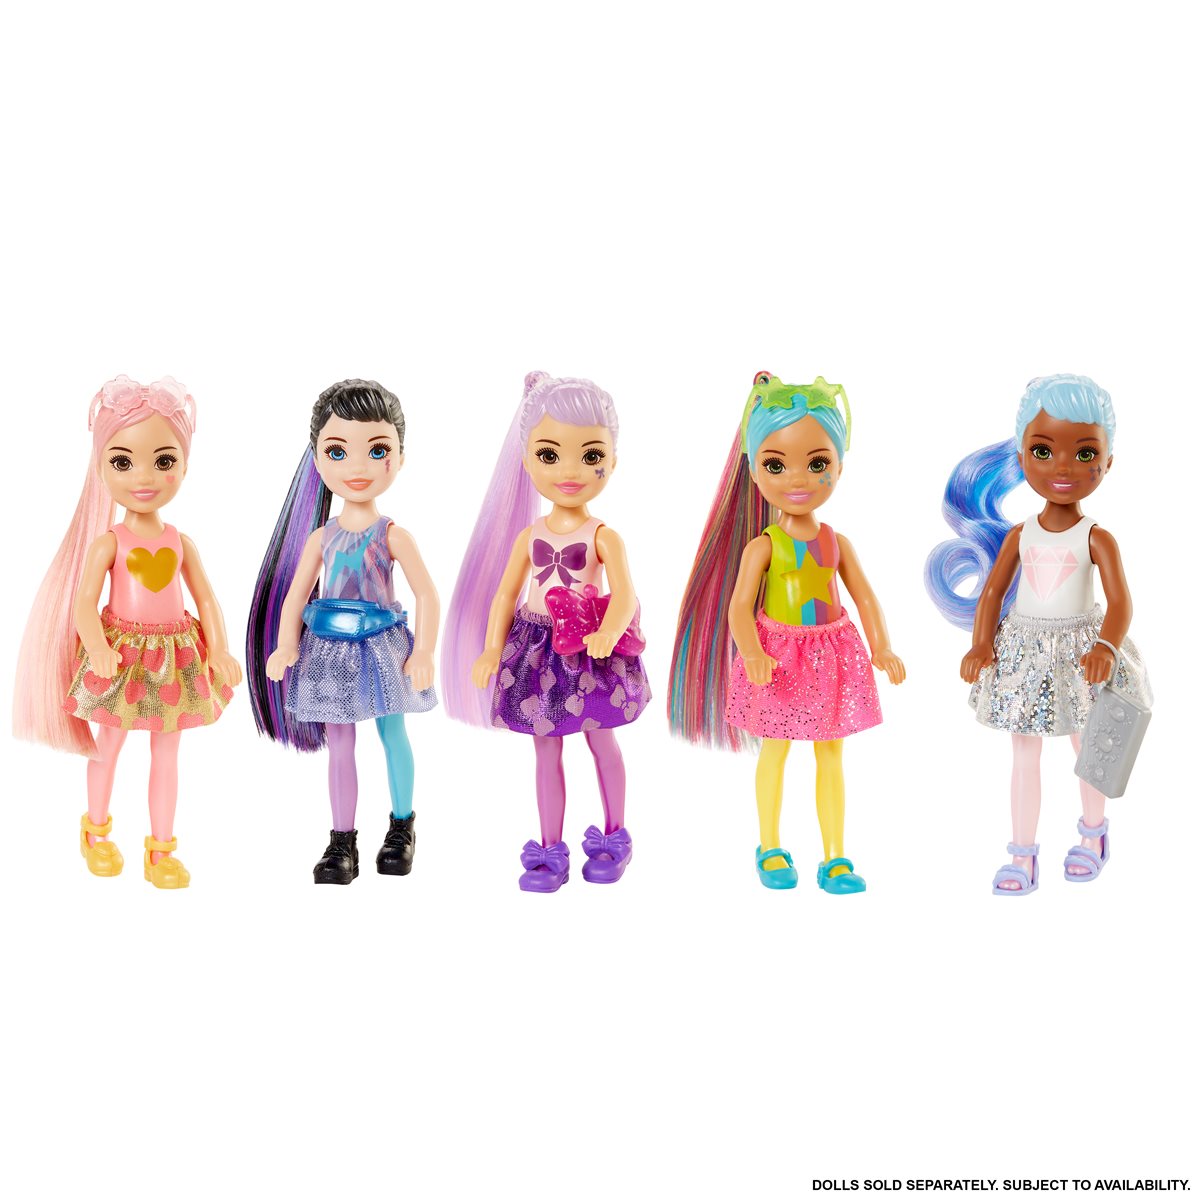 Barbie Pop Reveal Chelsea Doll Case of 4 - Entertainment Earth